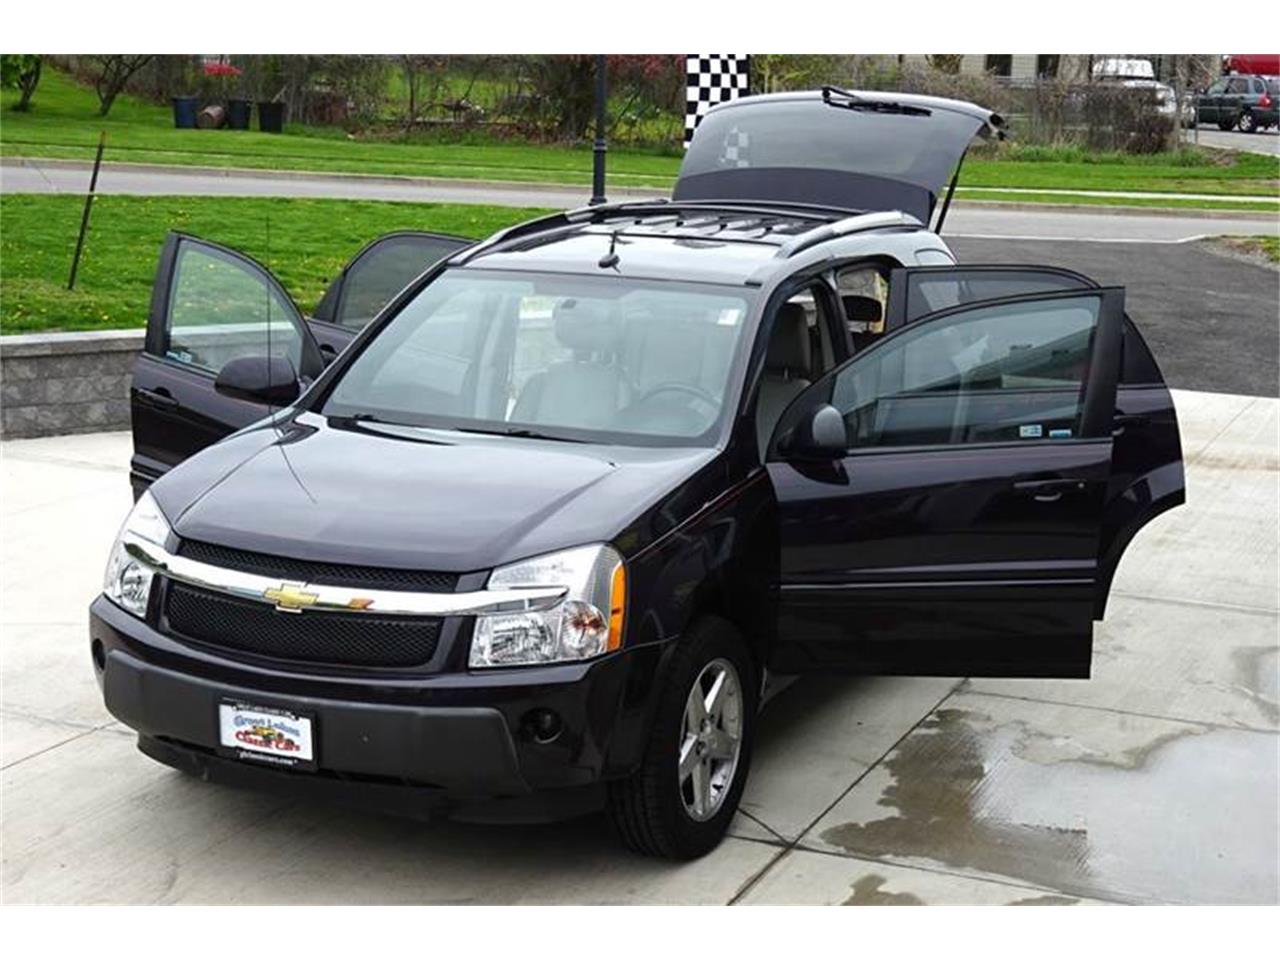 2006 chevy equinox for sale